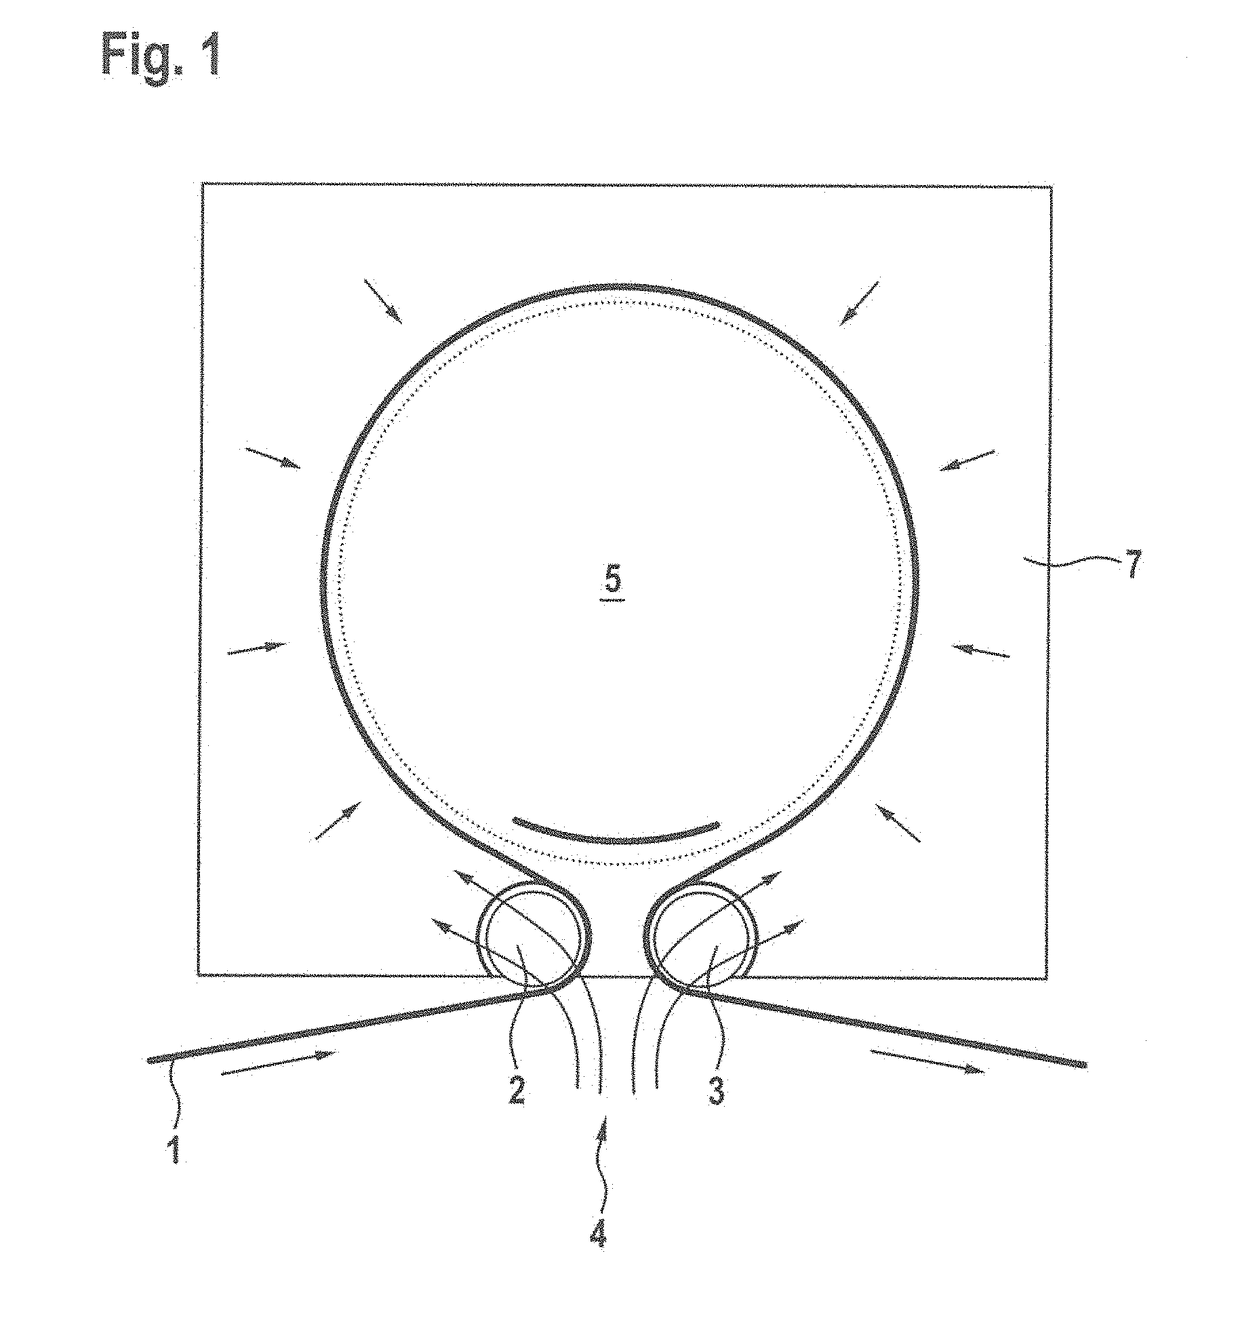 Device and method for thermally treating a continuous web of textile material